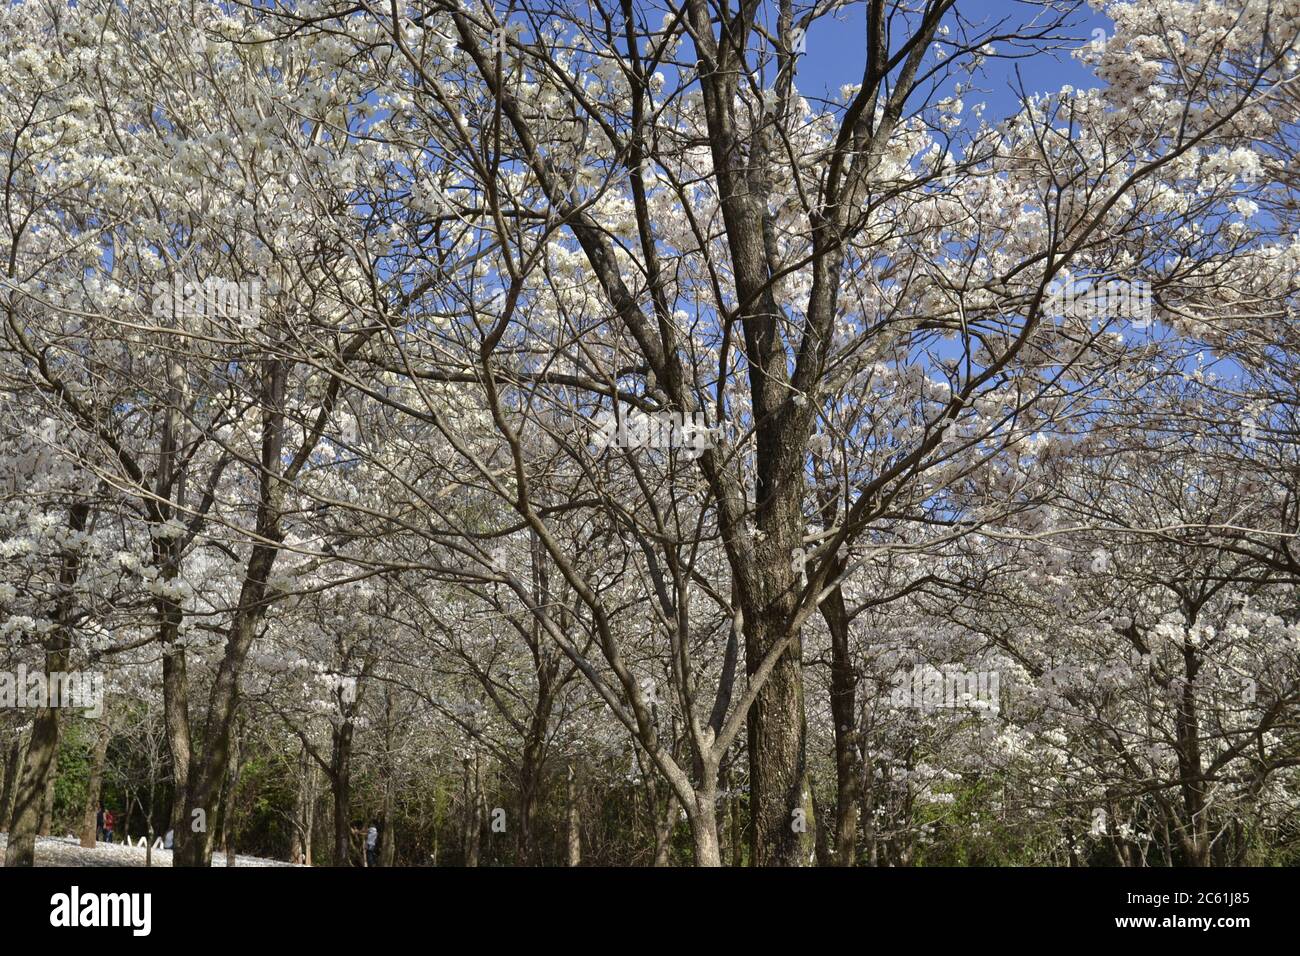 Ipes forest, trees with petals and white flowers, with selective focus on panoramic view, Brazil, South America Stock Photo